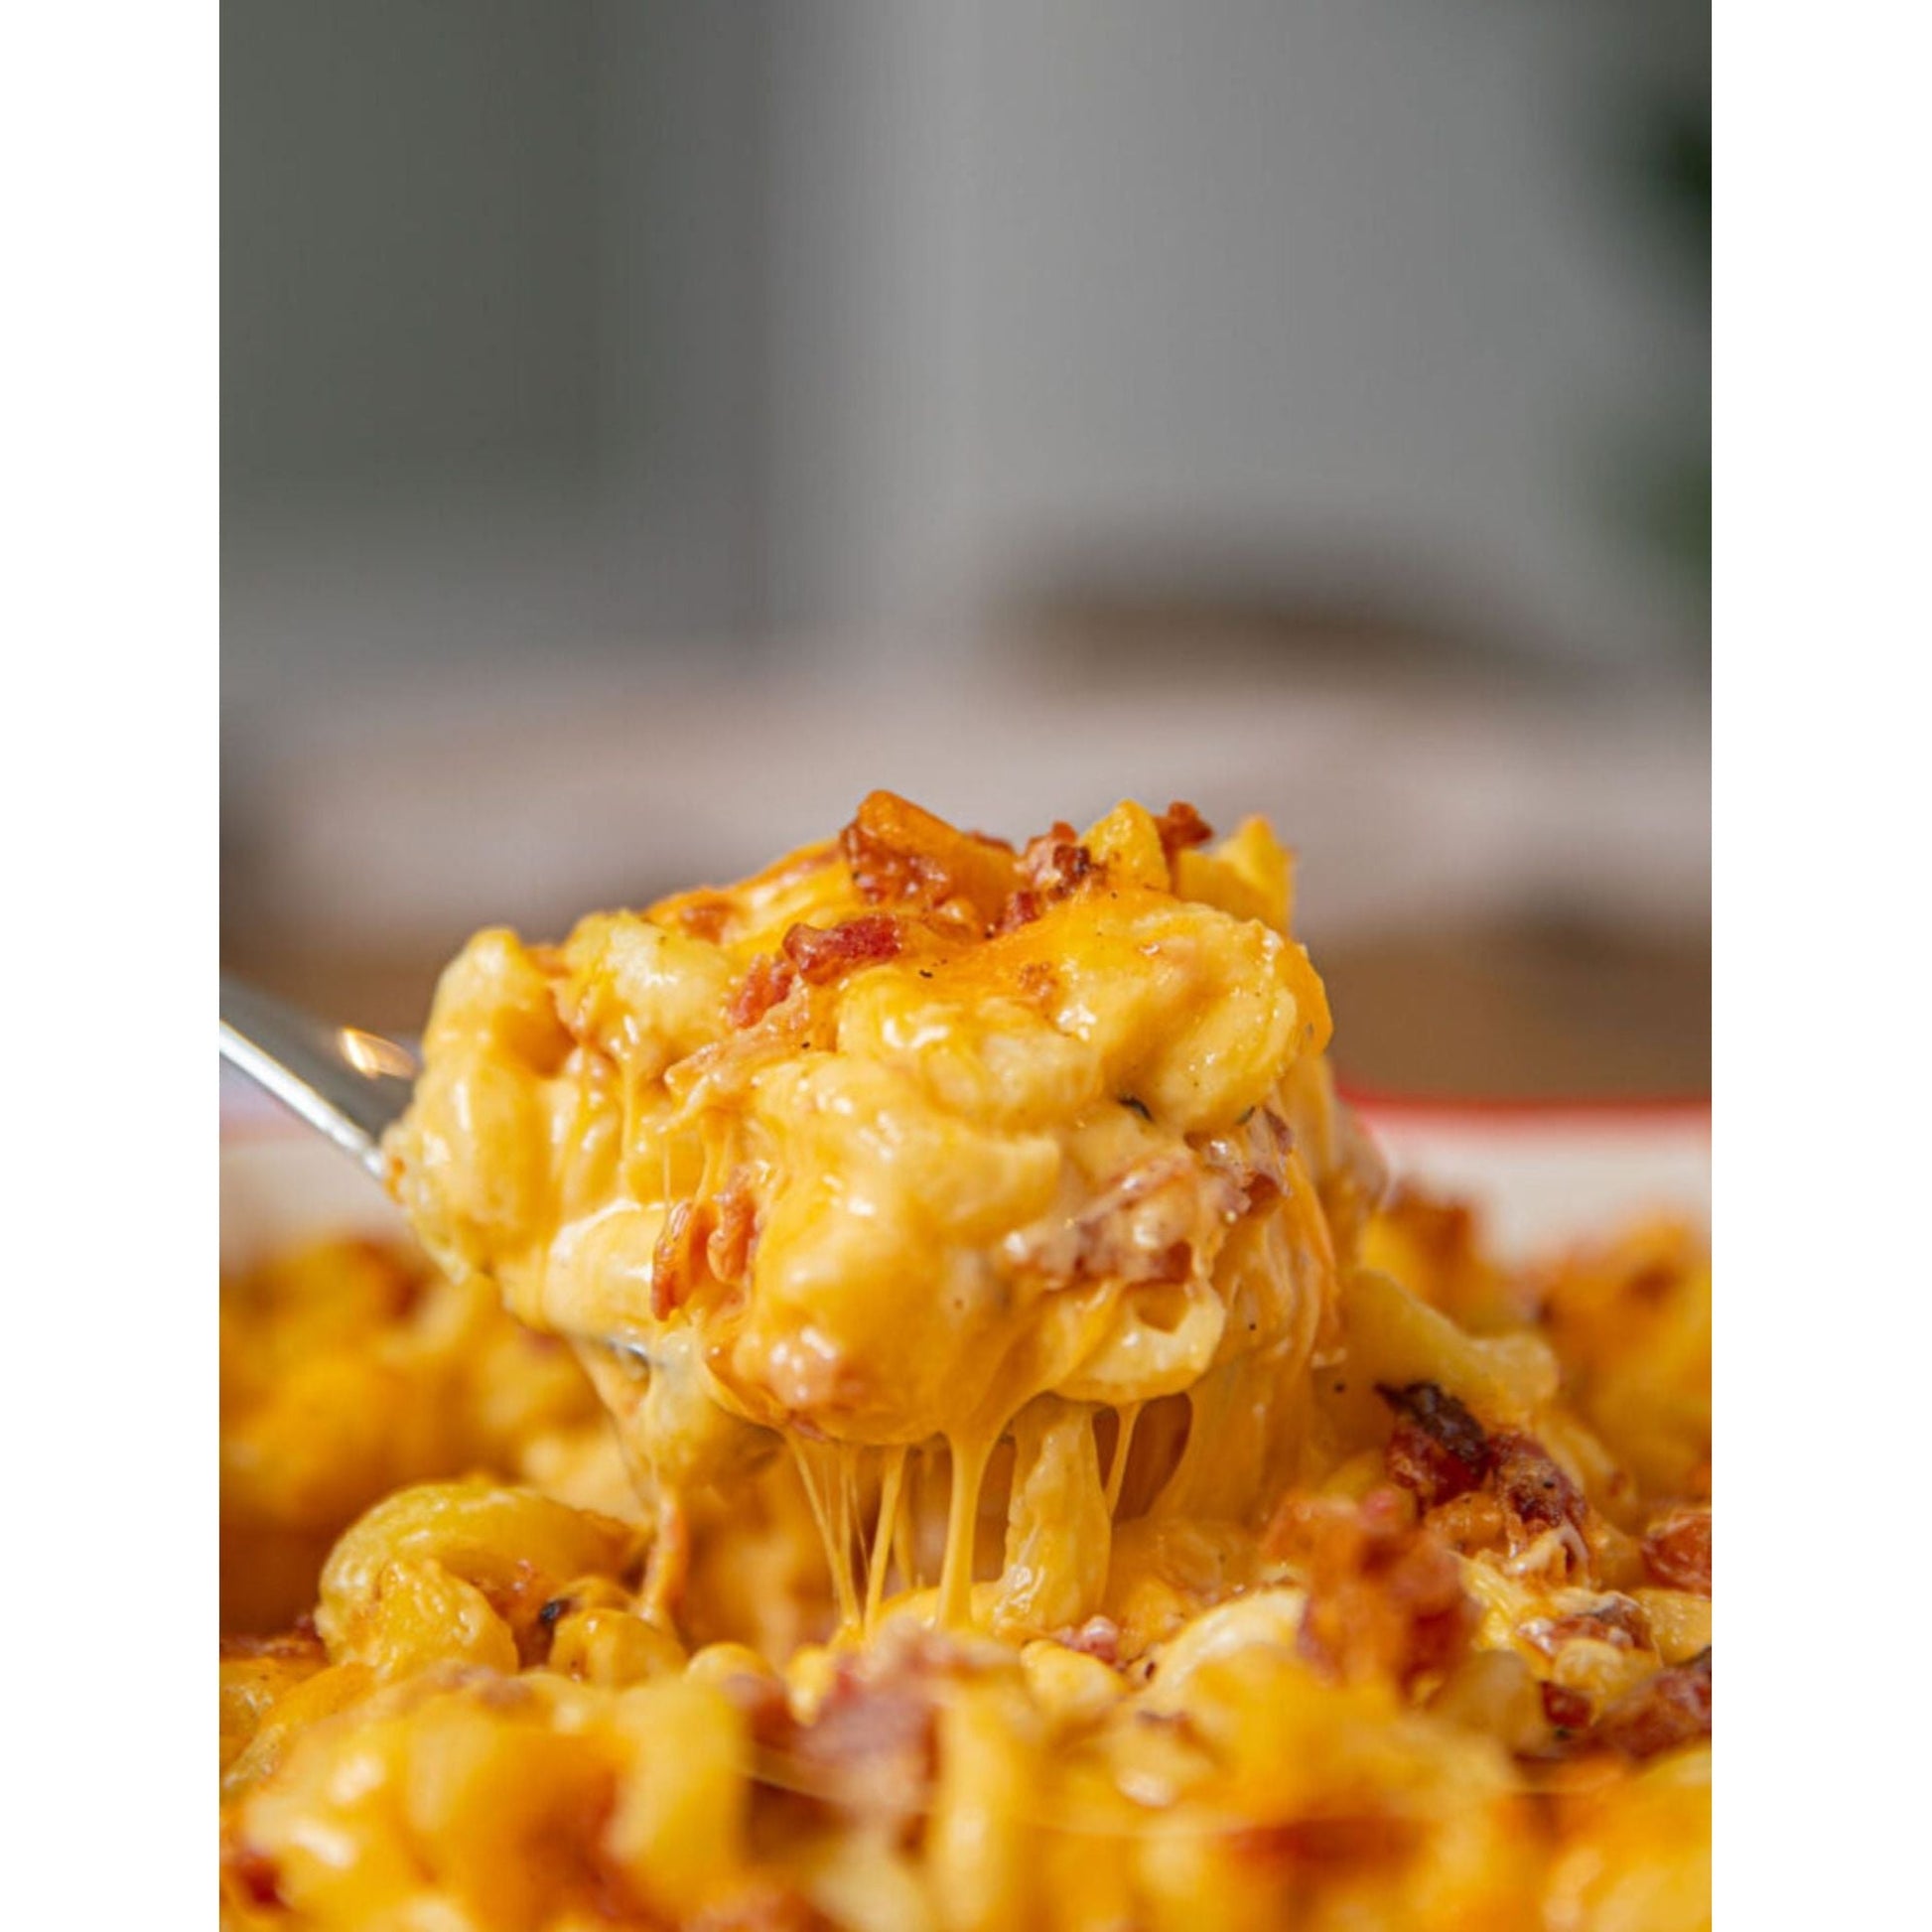 Bacon Mac 'n Cheese One Pot Dish with pasta included - Kitcheneez Mixes & More!